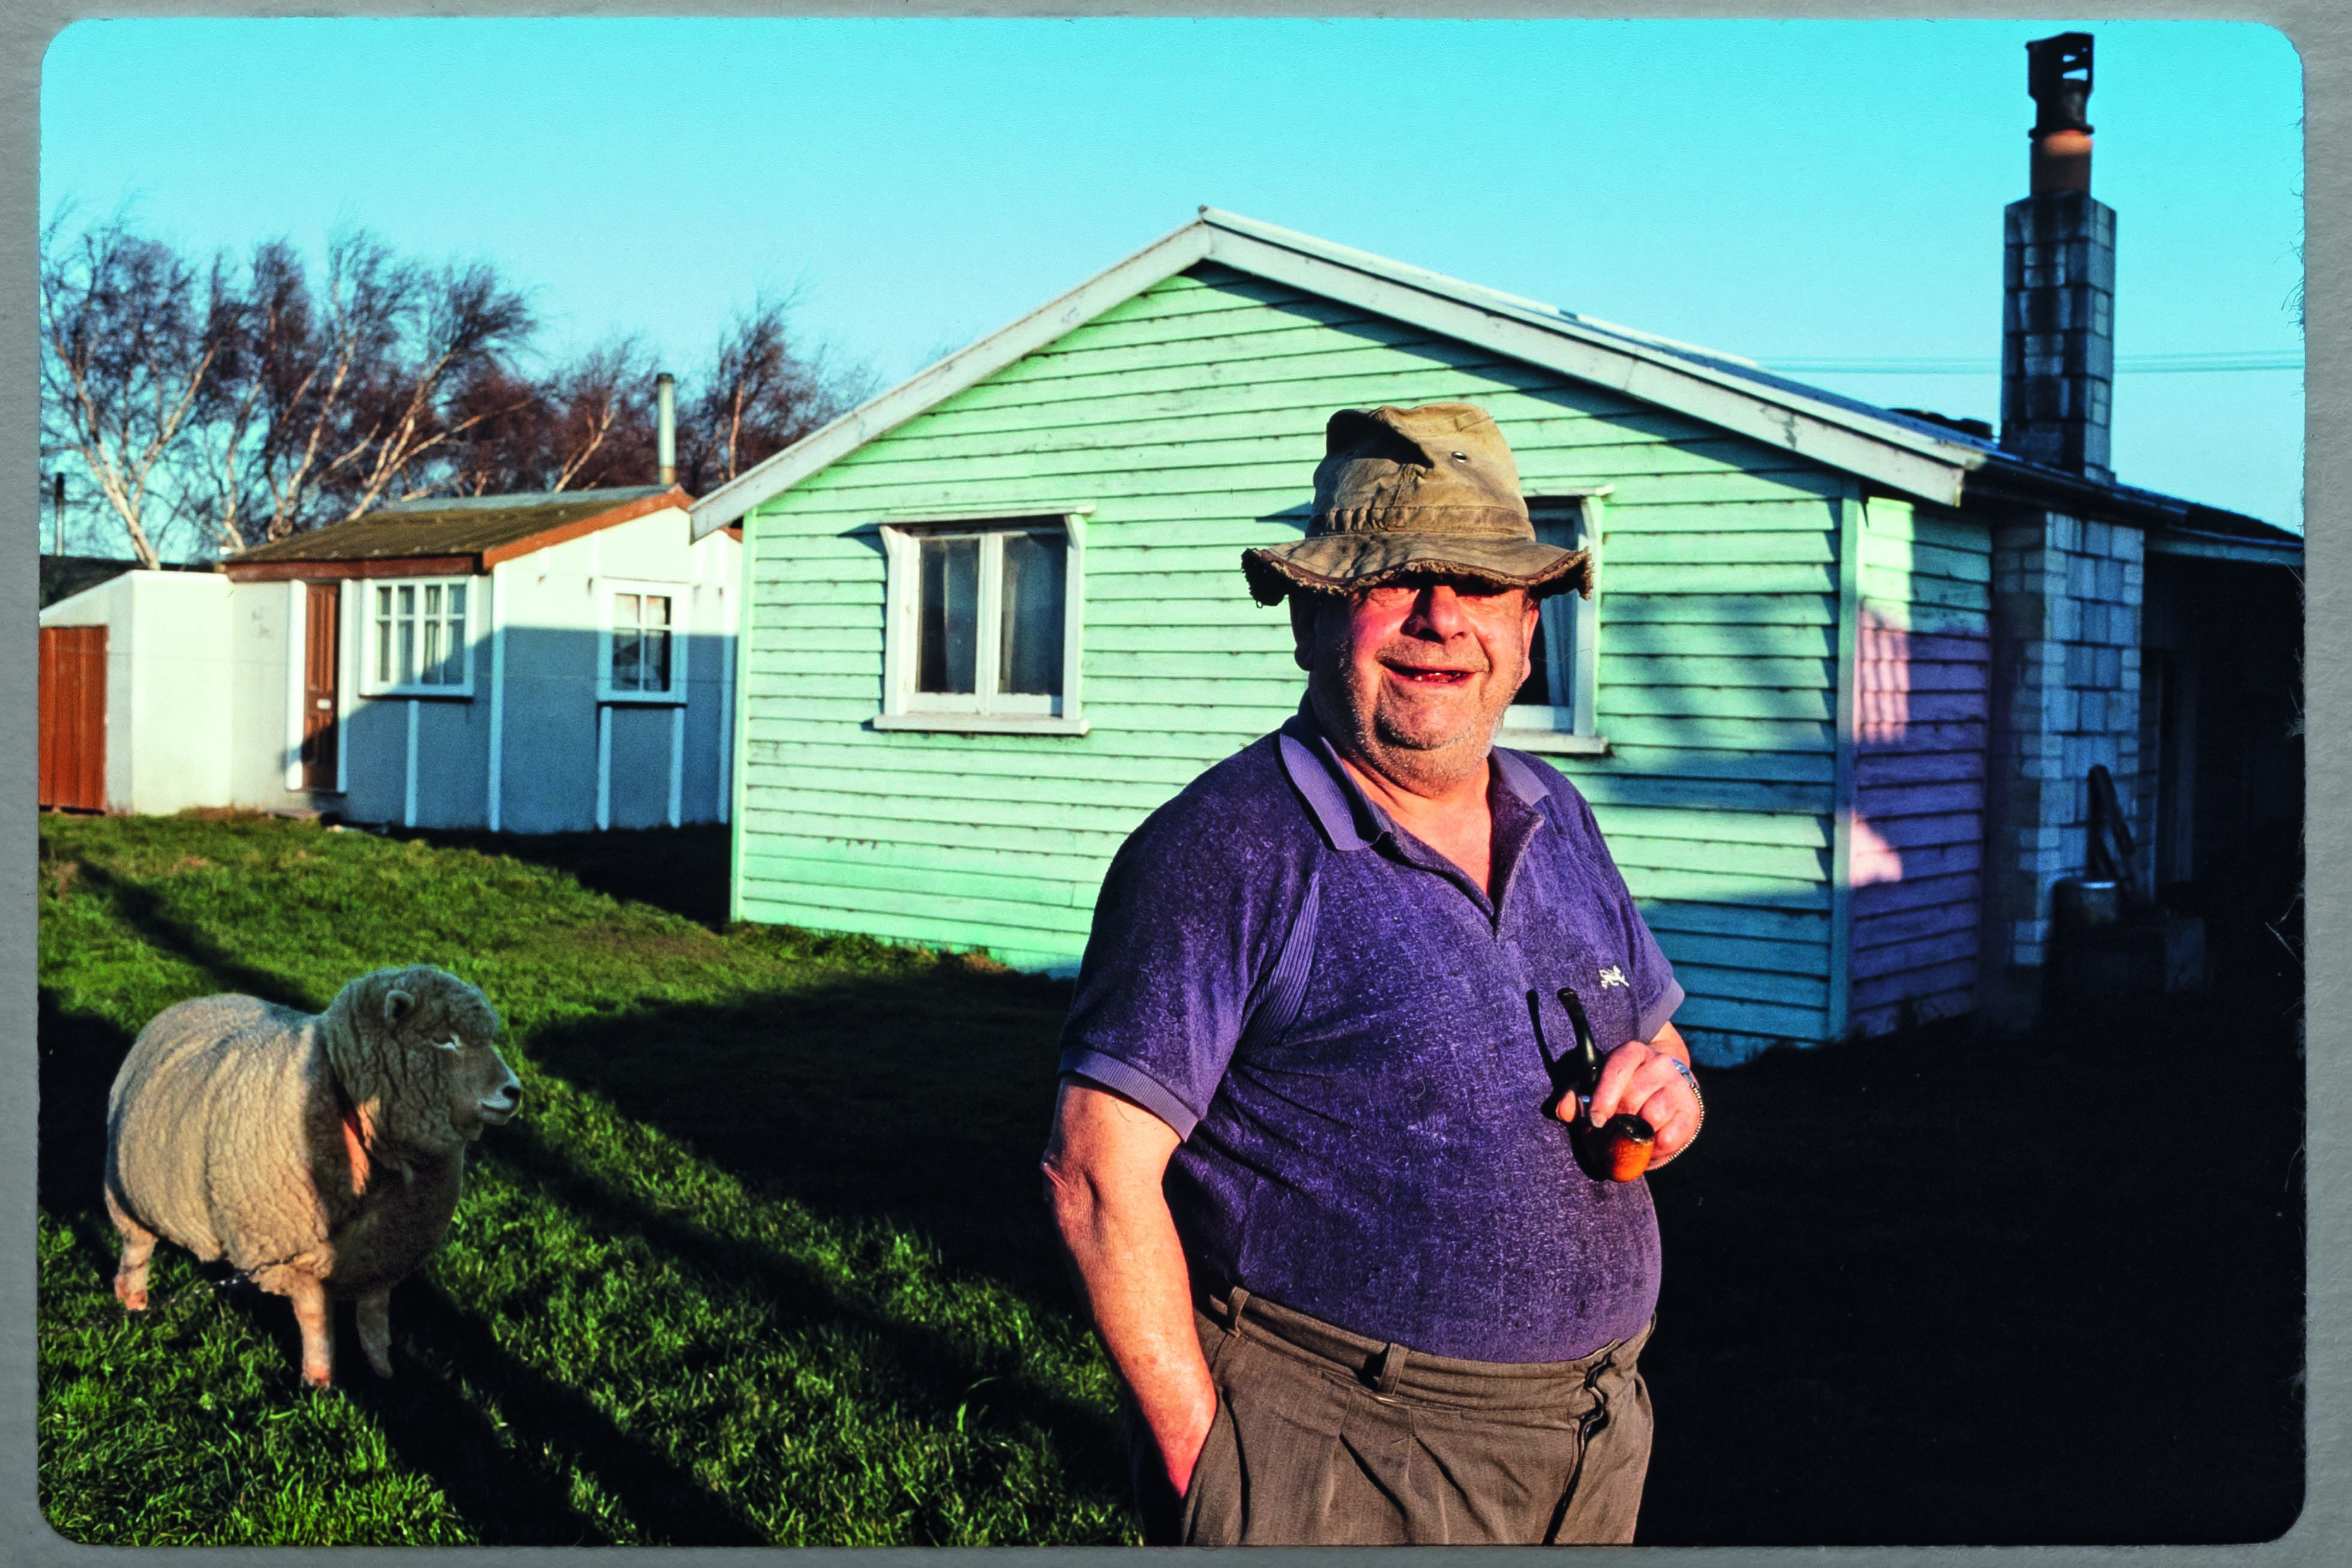 Robin Morrison. 1979. Norm Smith with his pet sheep, Pebbles. Greenpark Huts. Auckland Museum. © Robin Morrison Estate